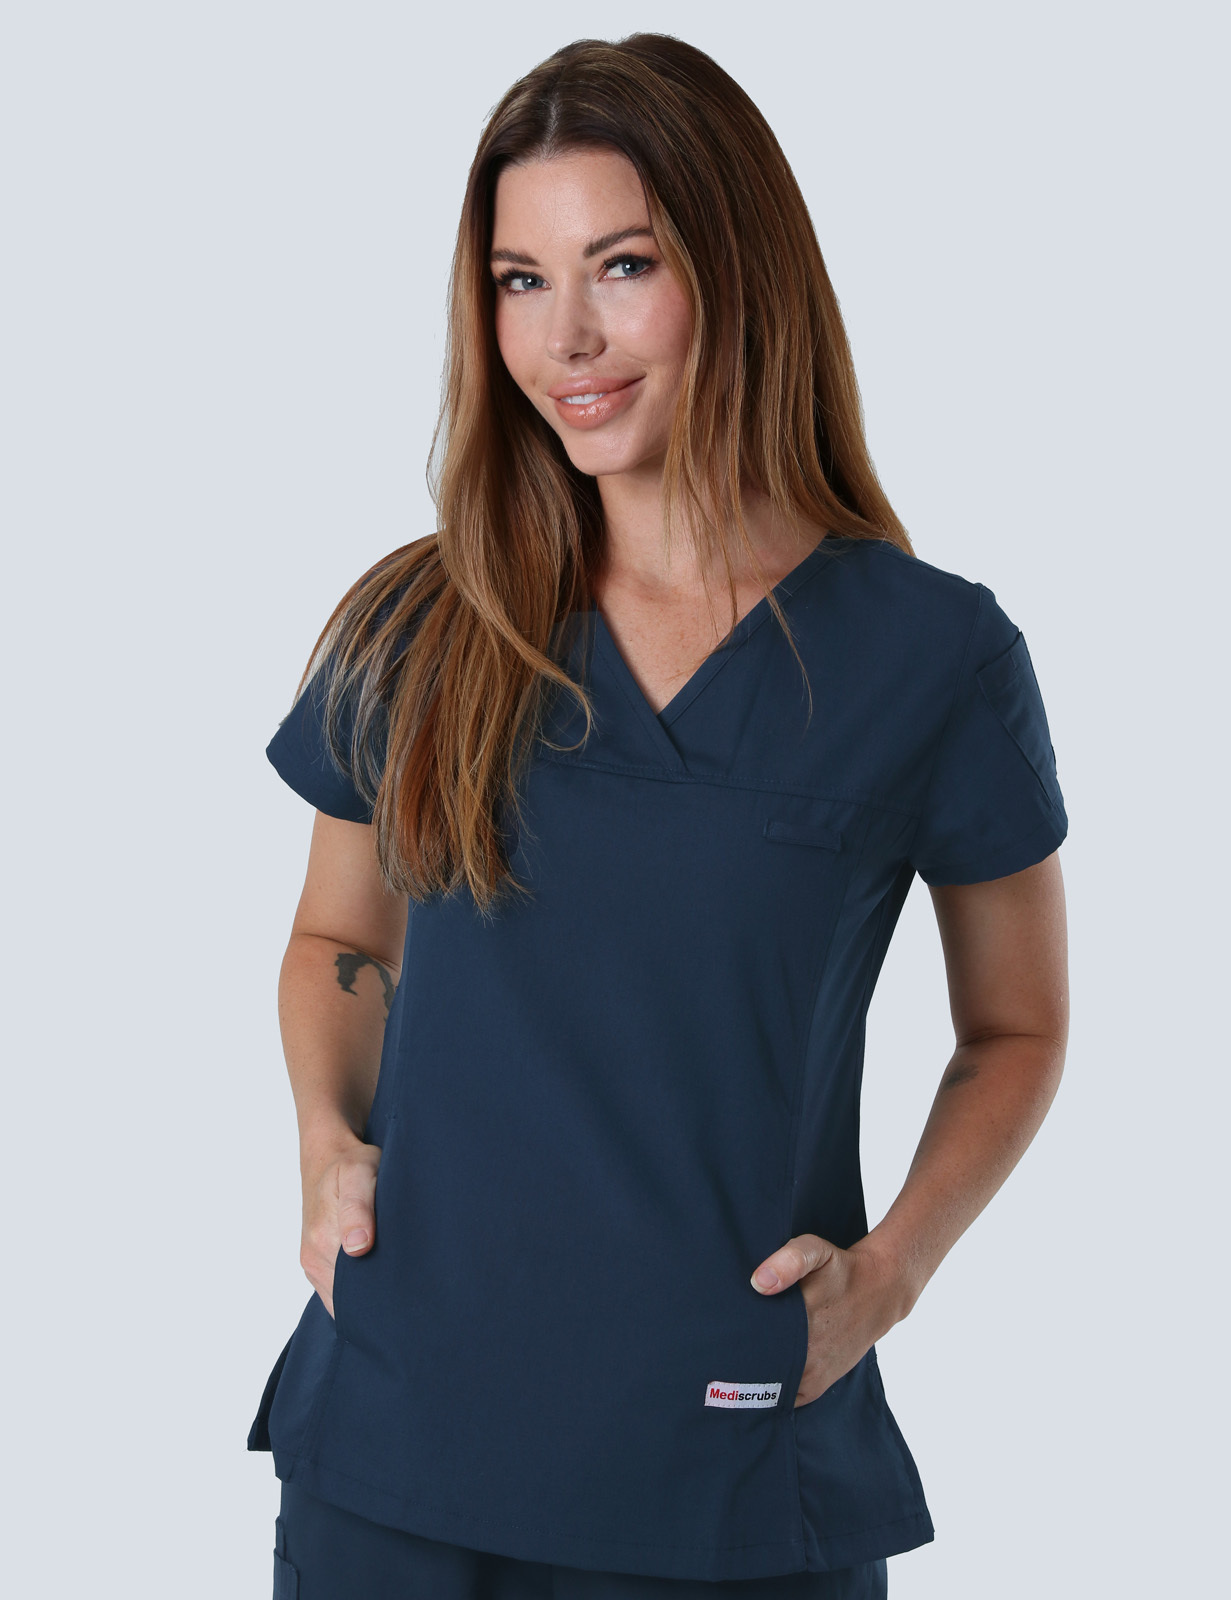 Children's Hospital Melbourne - ED (Women's Fit Solid Scrub Top and Cargo Pants in Navy incl Logos)